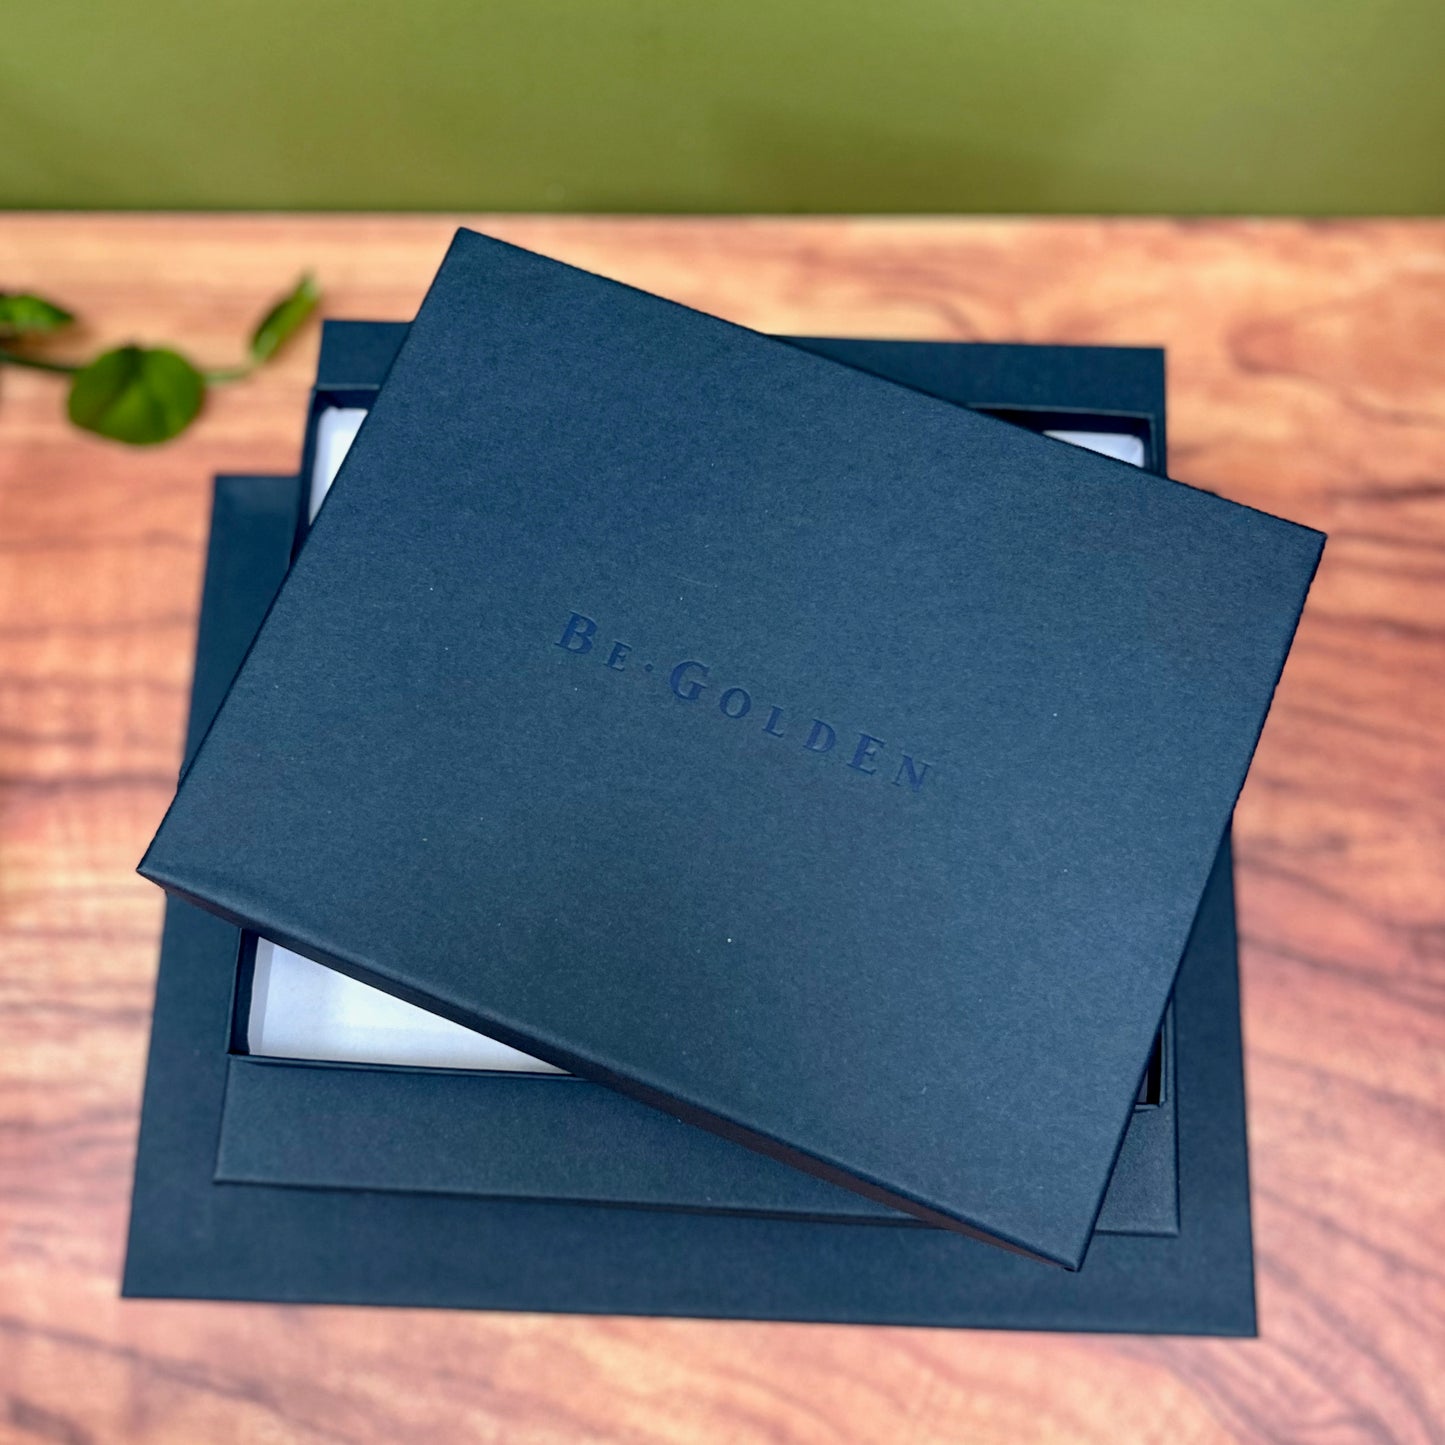  a pile of presentation boxes are on a wooden table. They are blue and they have been personalised with begolden on the lids